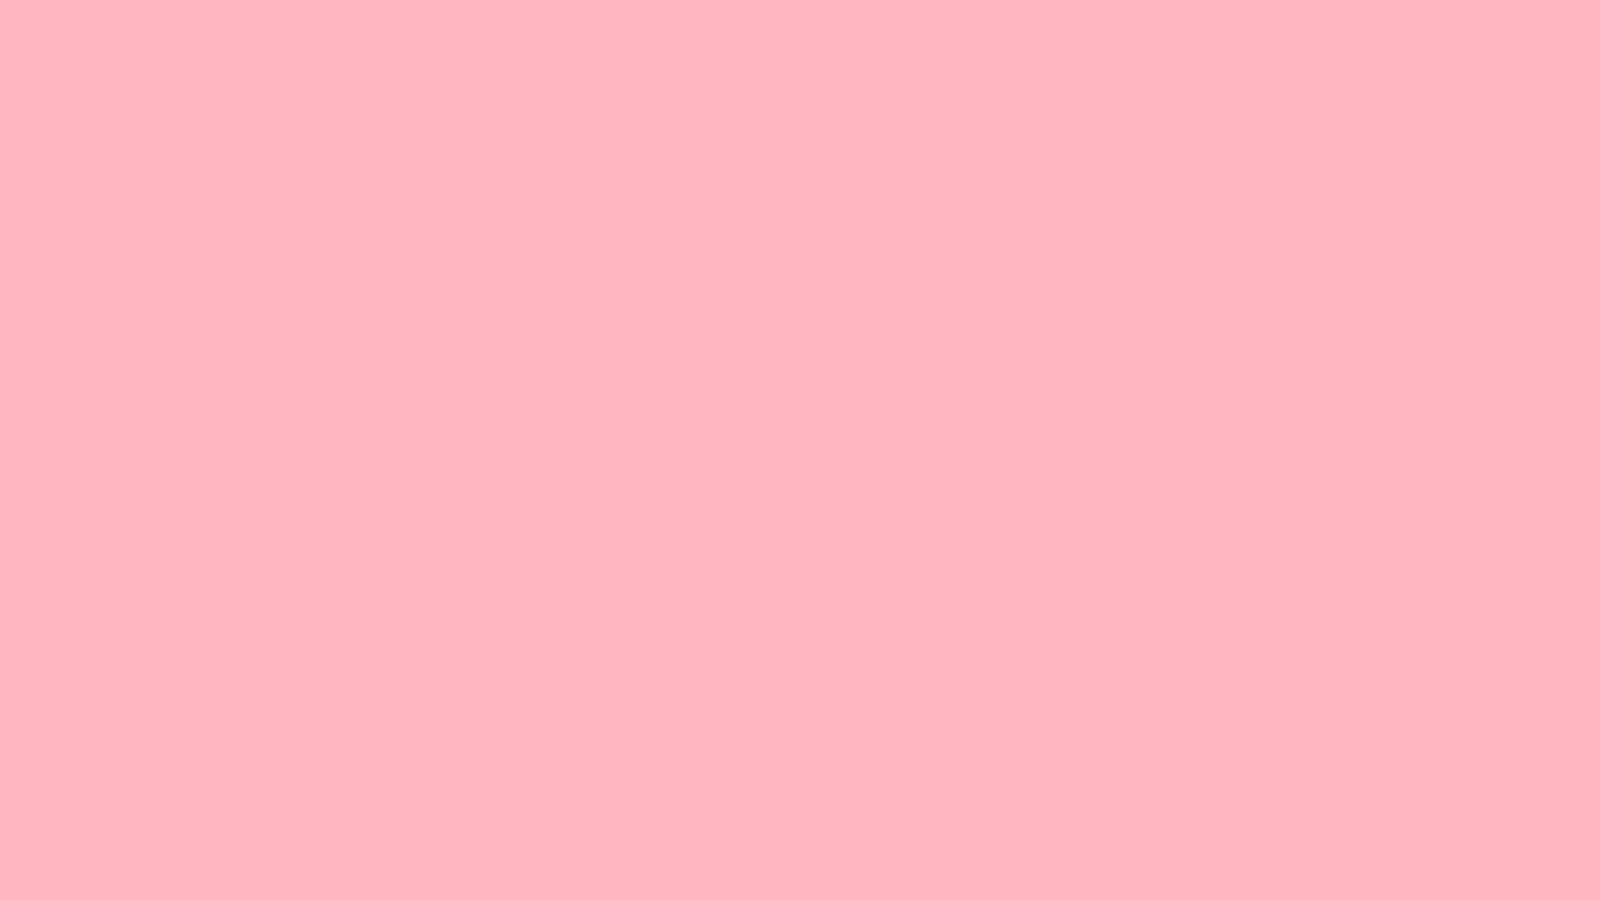 Free 1600x900 resolution Light Pink solid color background view and